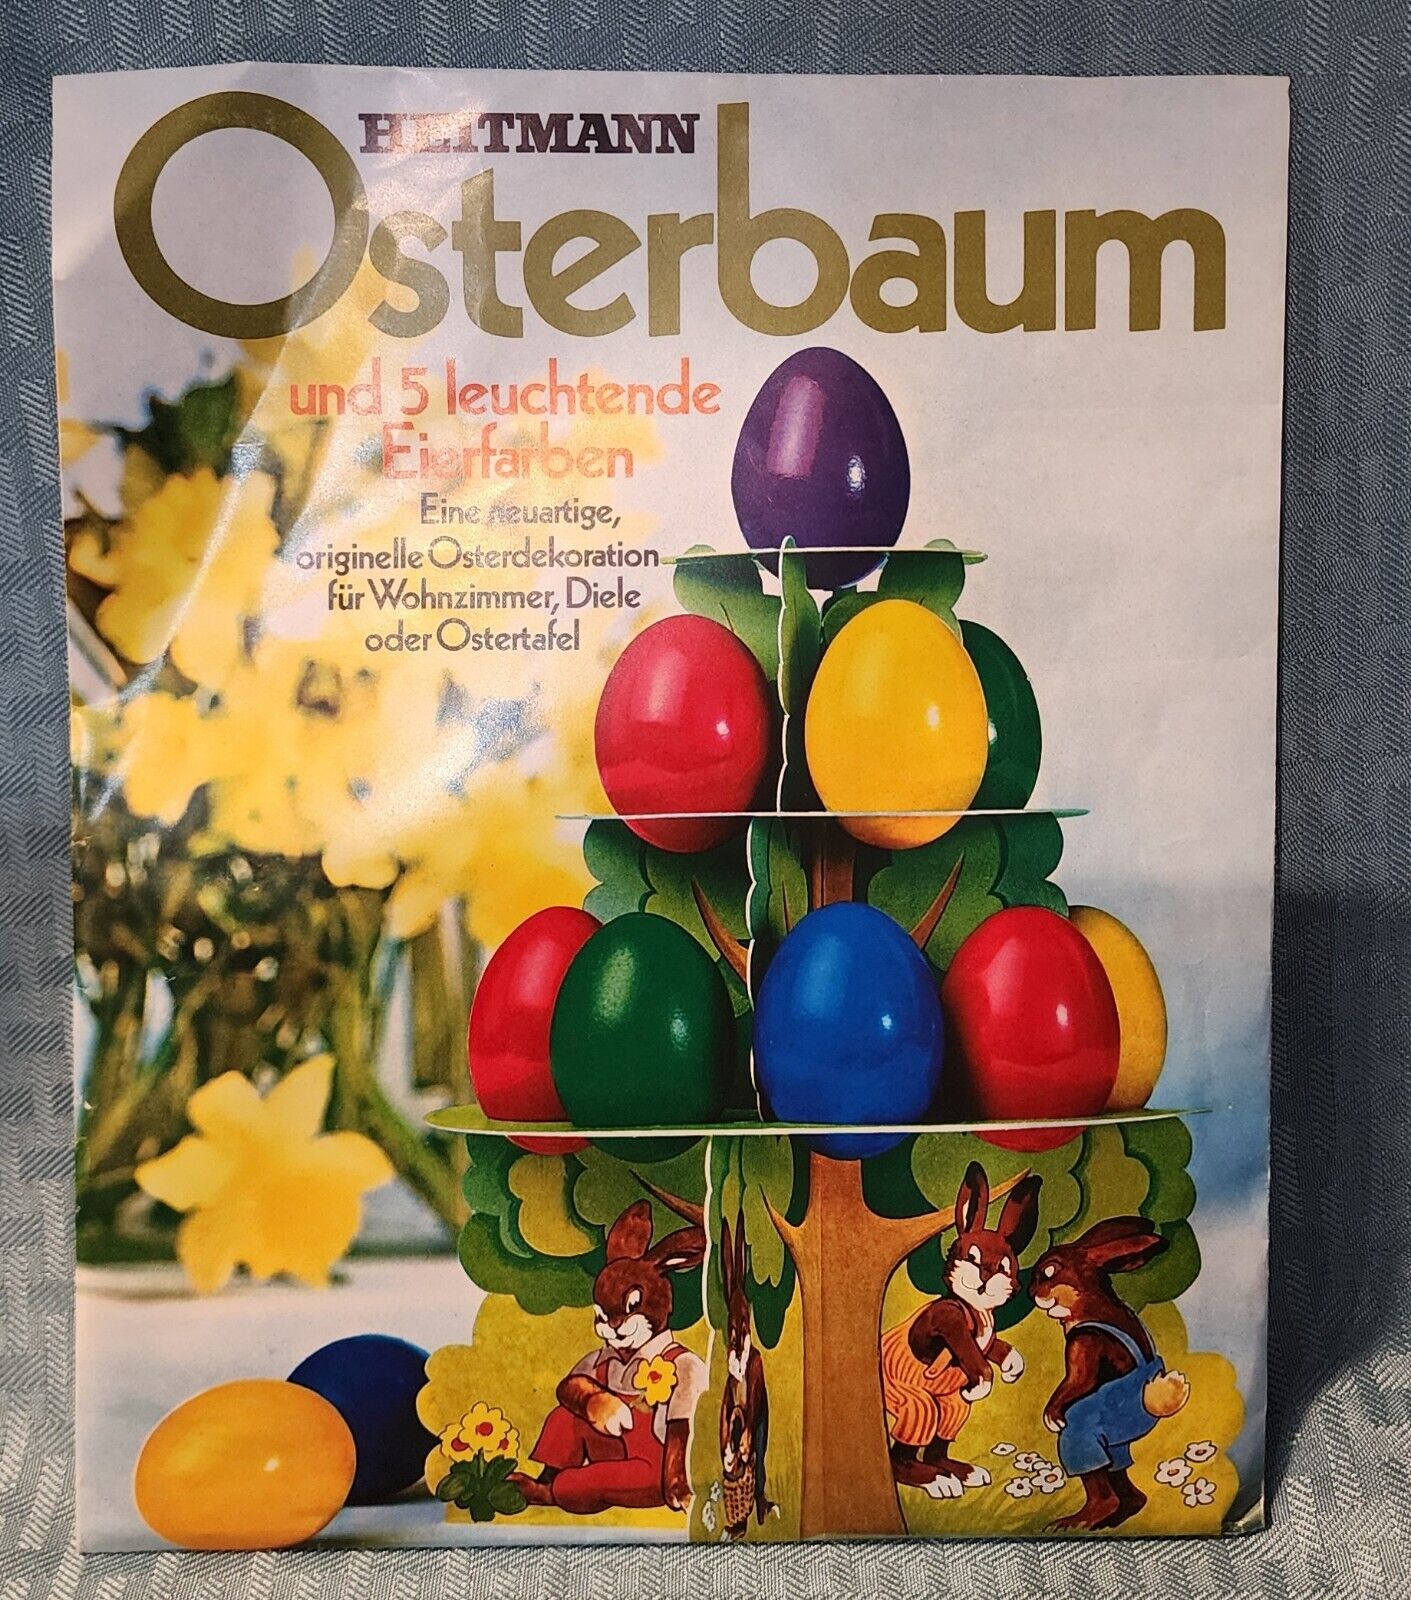 Rare Heitmann Osterbaum German Easter Egg display - New, Never Used